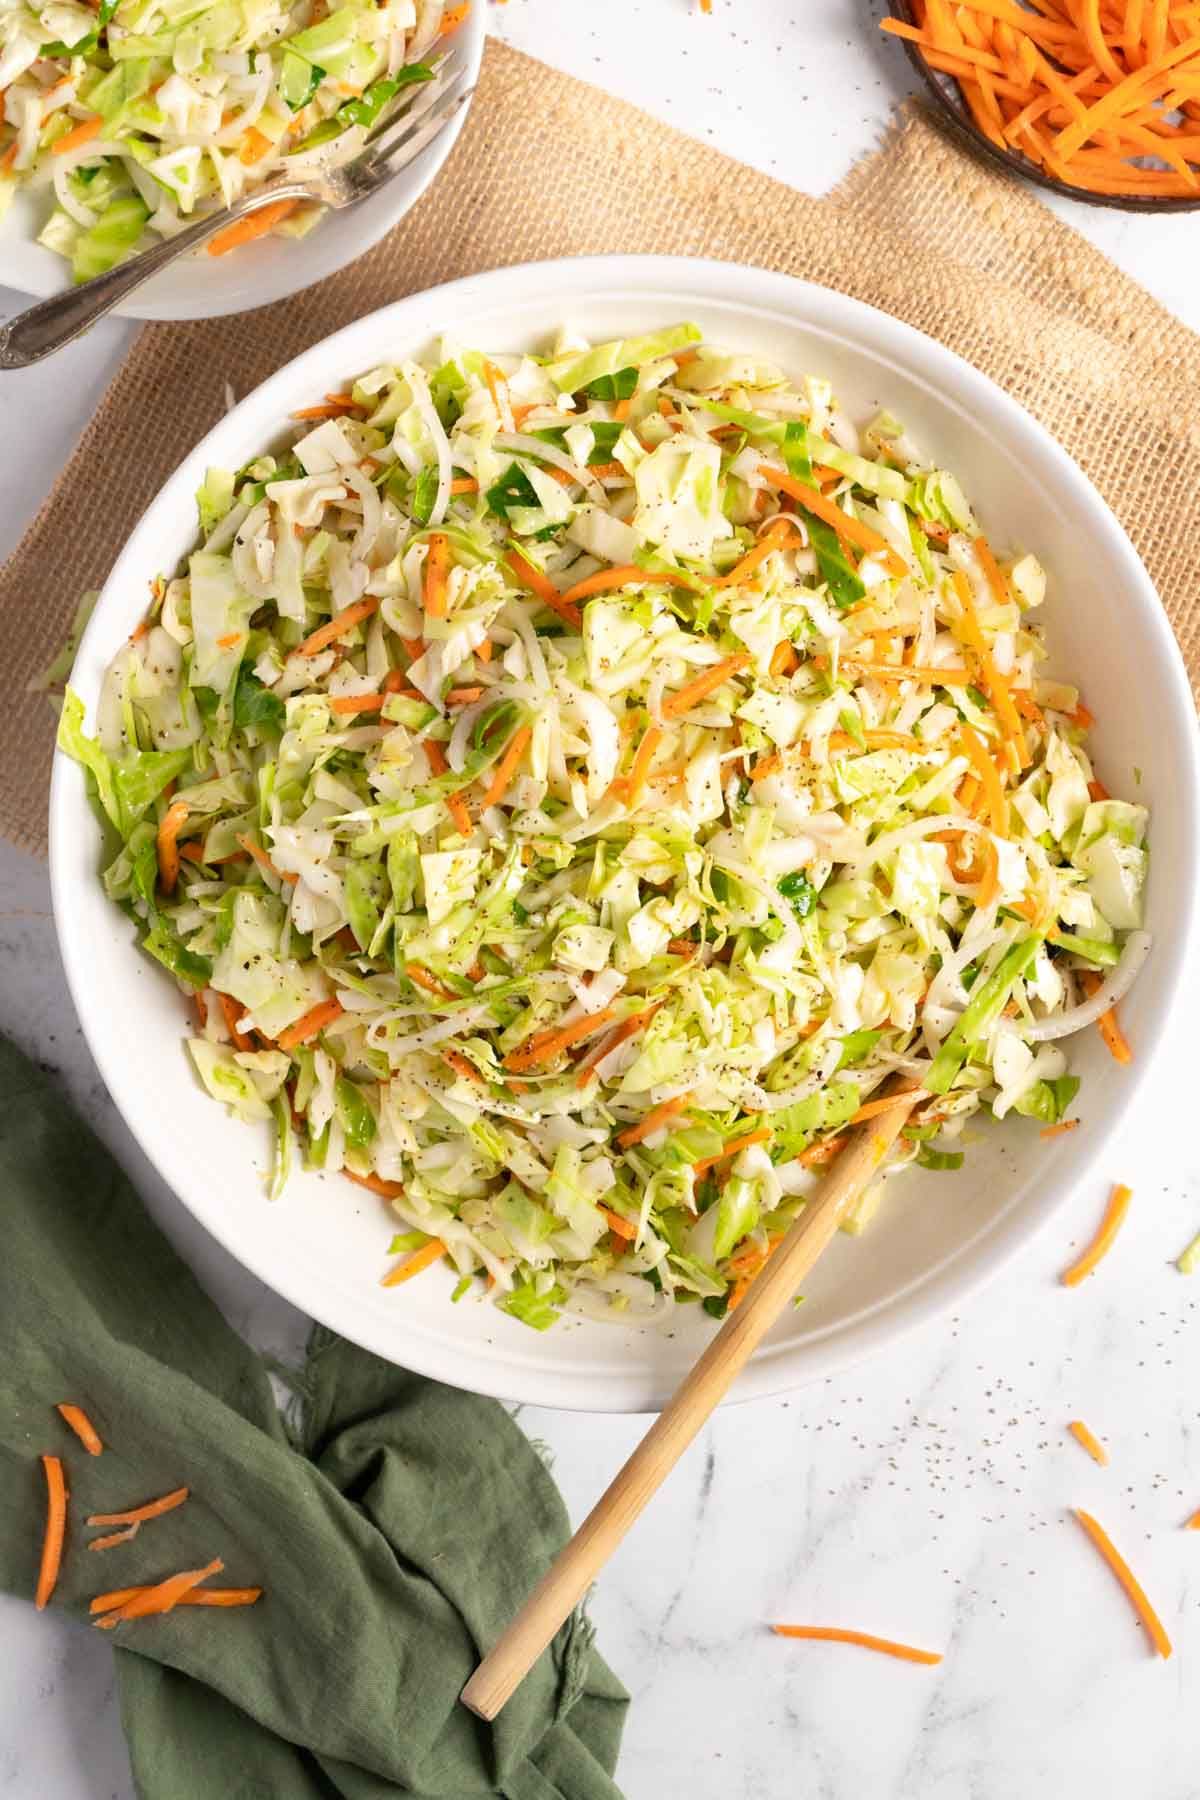 Flavorful Old-Fashioned Coleslaw With Vinegar in a white bowl with a wooden spoon.